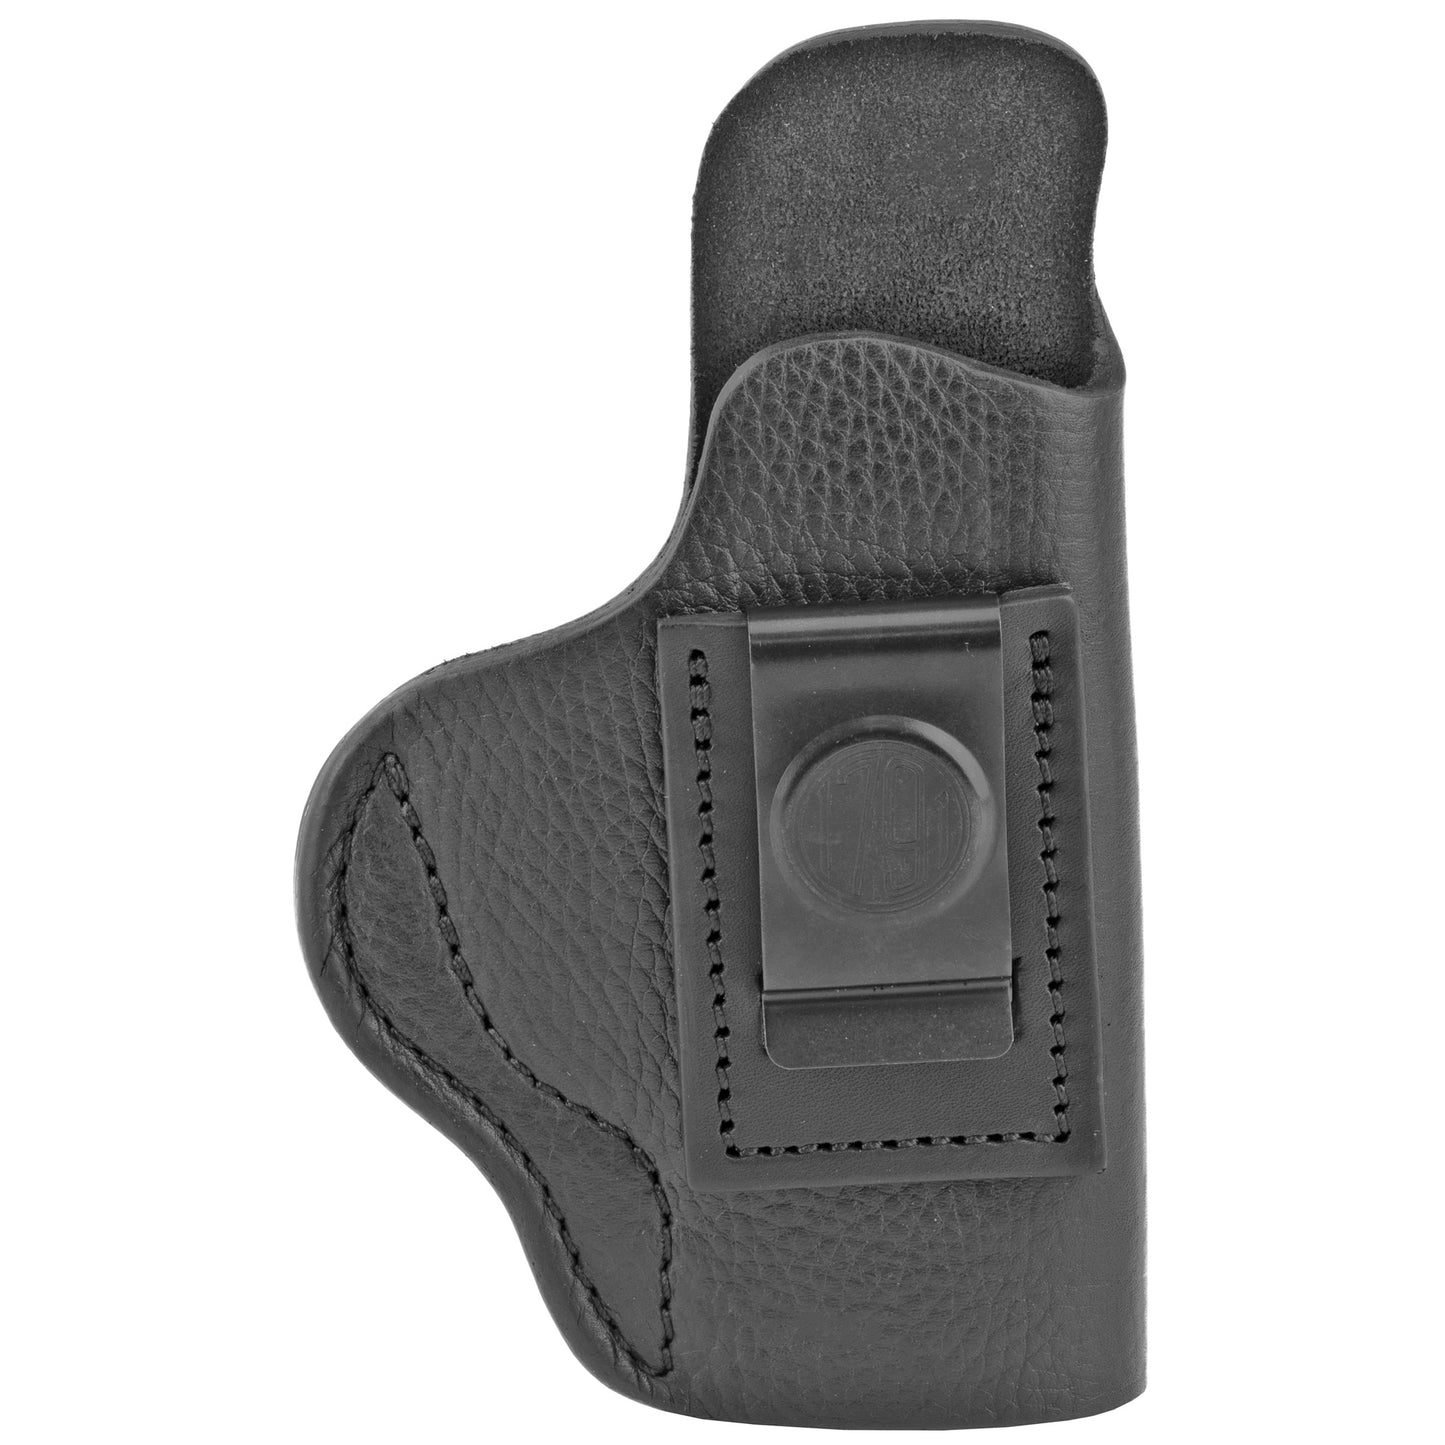 1791 Smooth Concealment IWB Holster Black Fits Glock 17/19/22/23/25 Right Size 4